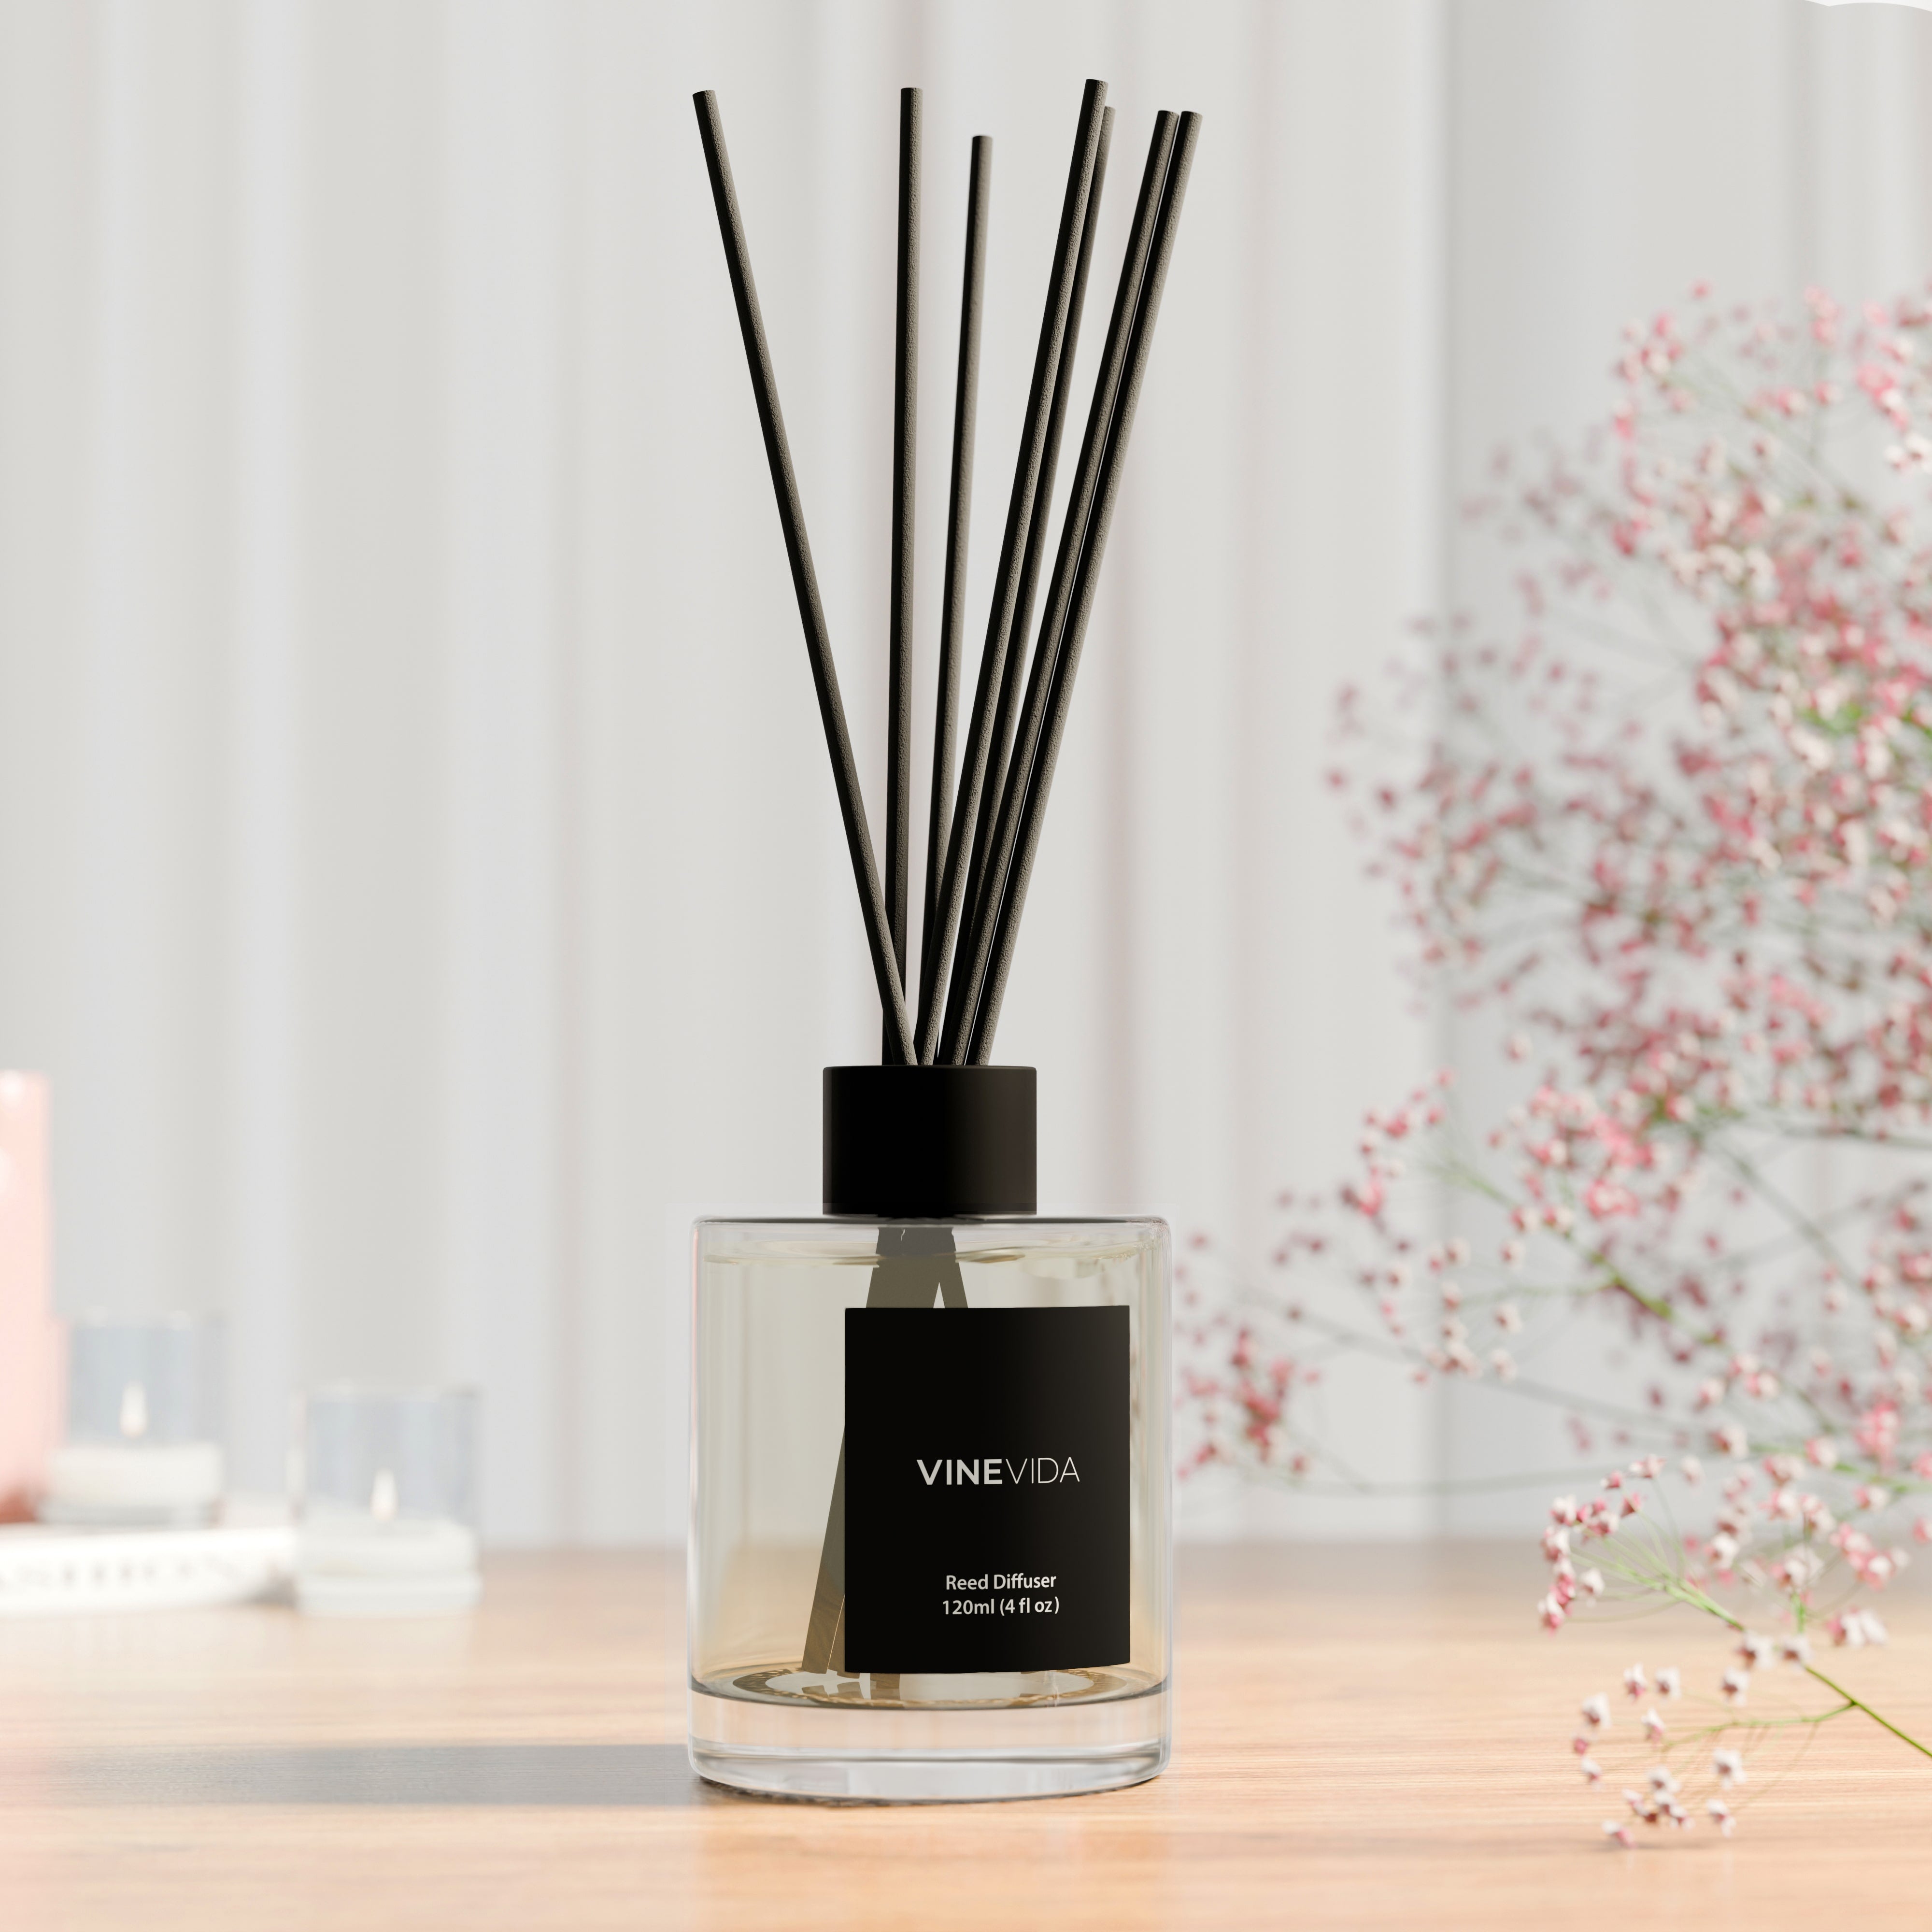 NO. 1008 Reed Diffuser - Inspired by: E11EVEN